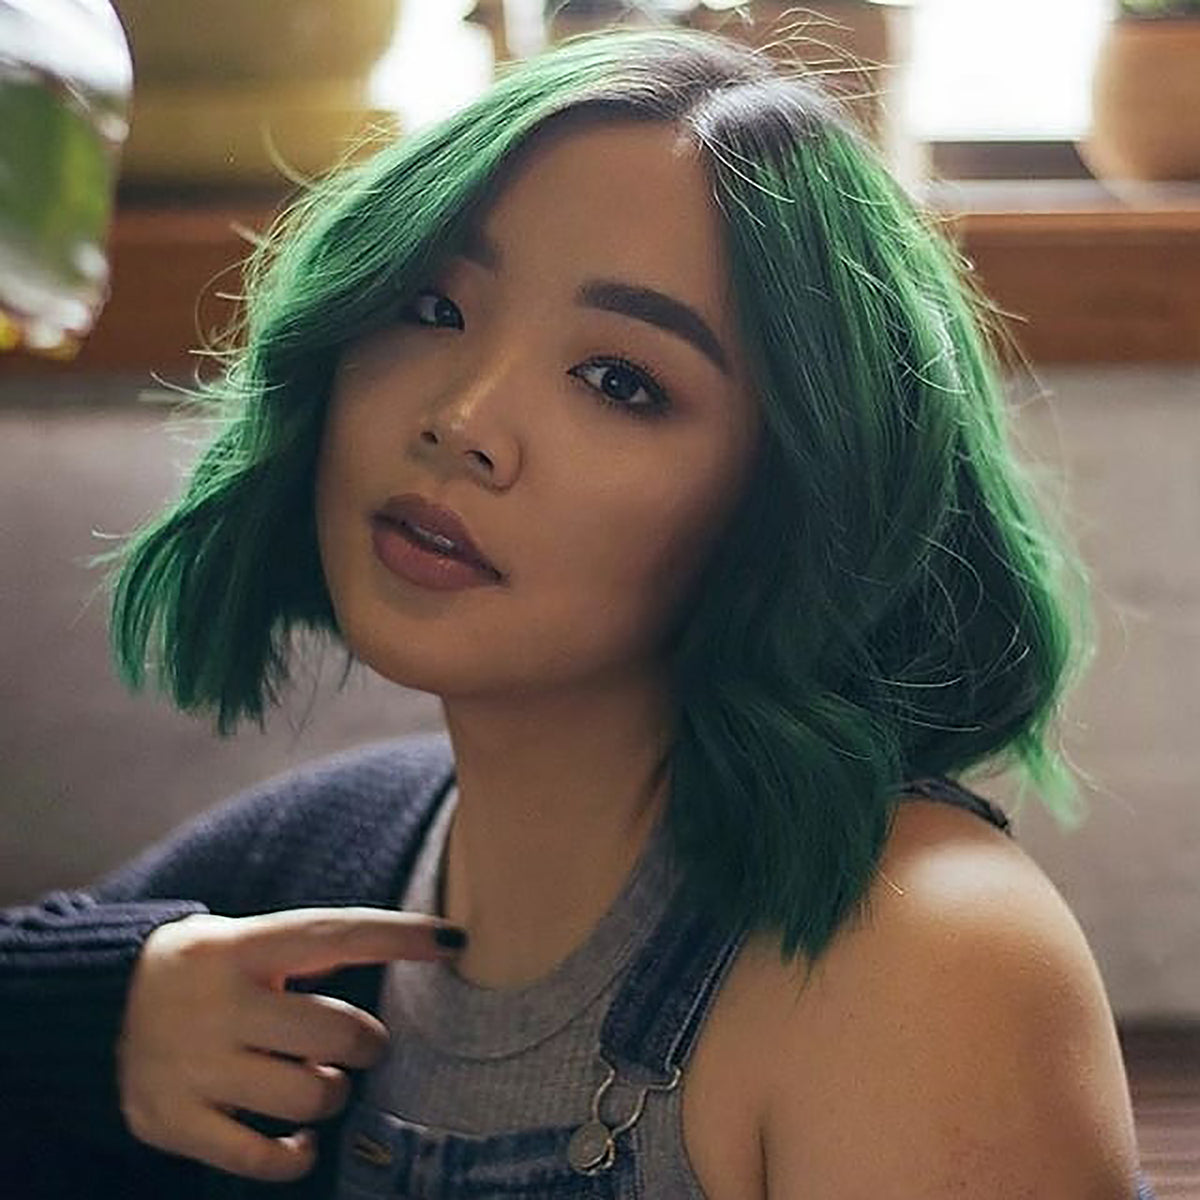 person with short, curled emerald green hair on pre-lightened hair with dark roots wearing overalls